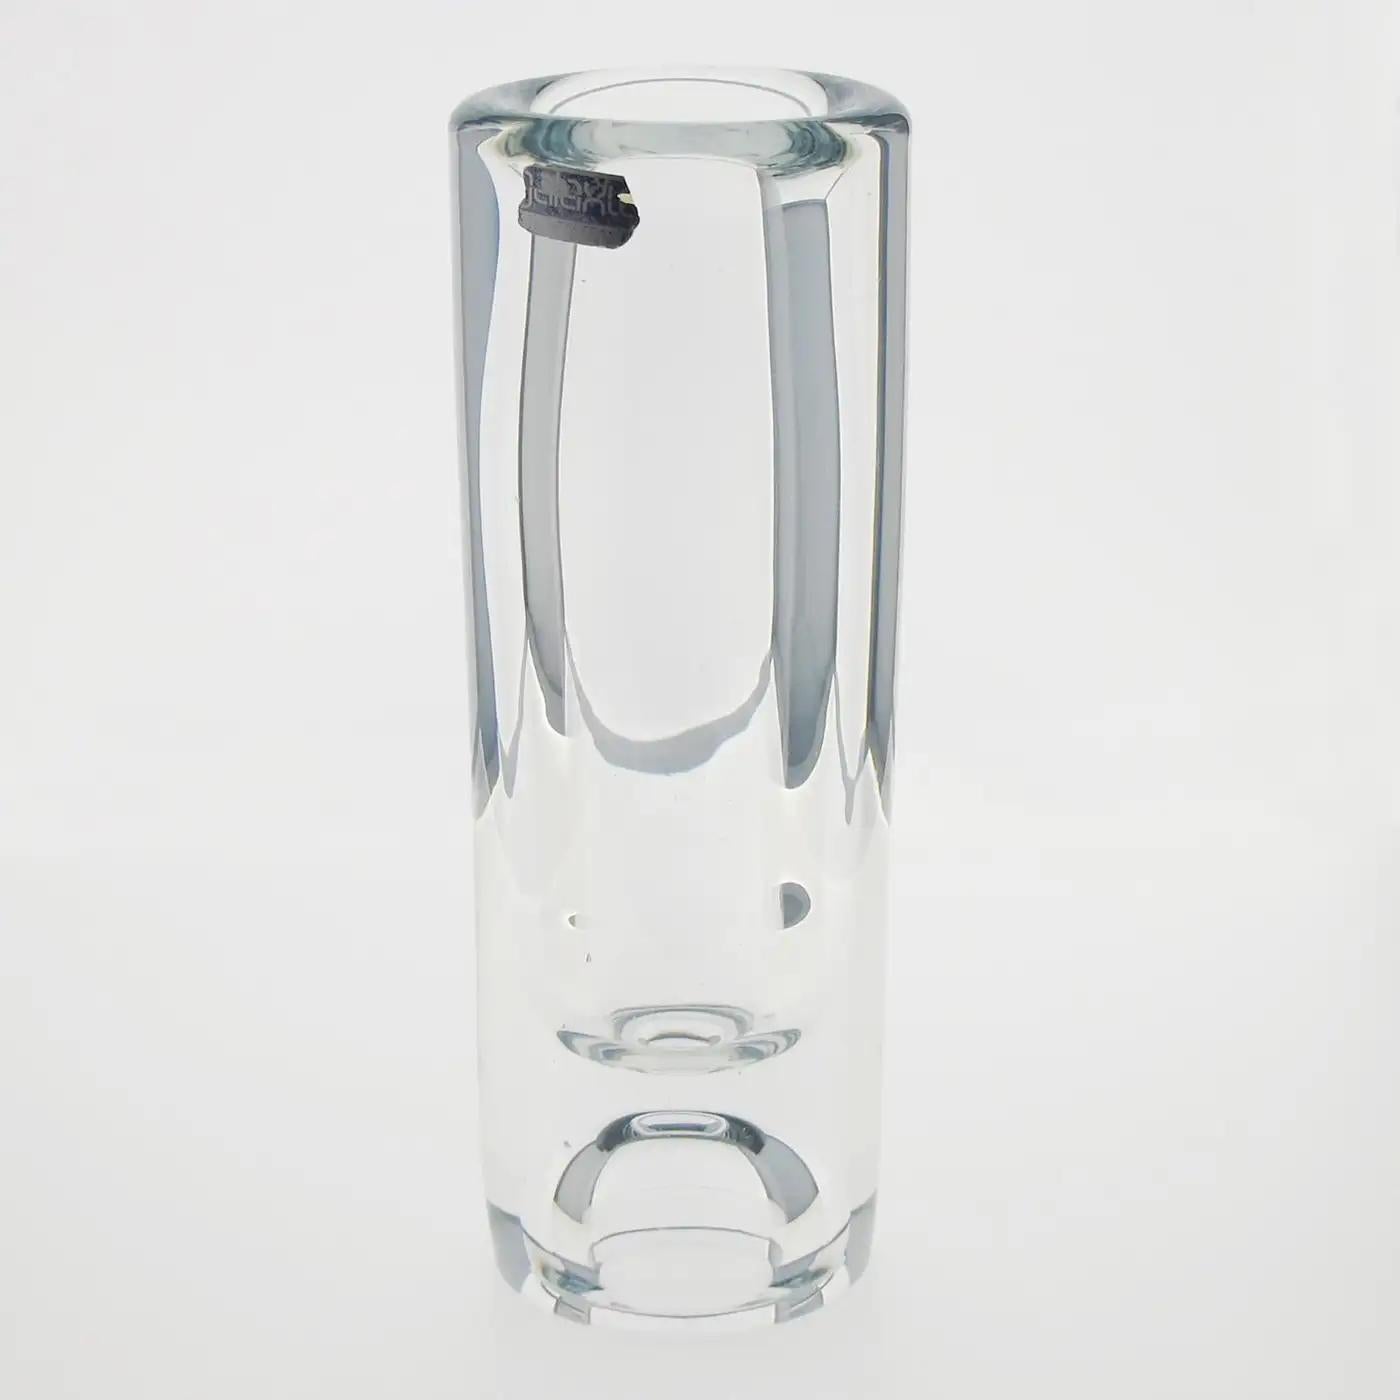 Compagnie Francaise du Cristal De Belroy for Daum produced this modernist crystal vase, circa 1970. The modern slim design has a thick base and tumbler shape. The vase still has its original sticker label on the side. This vase is part of the